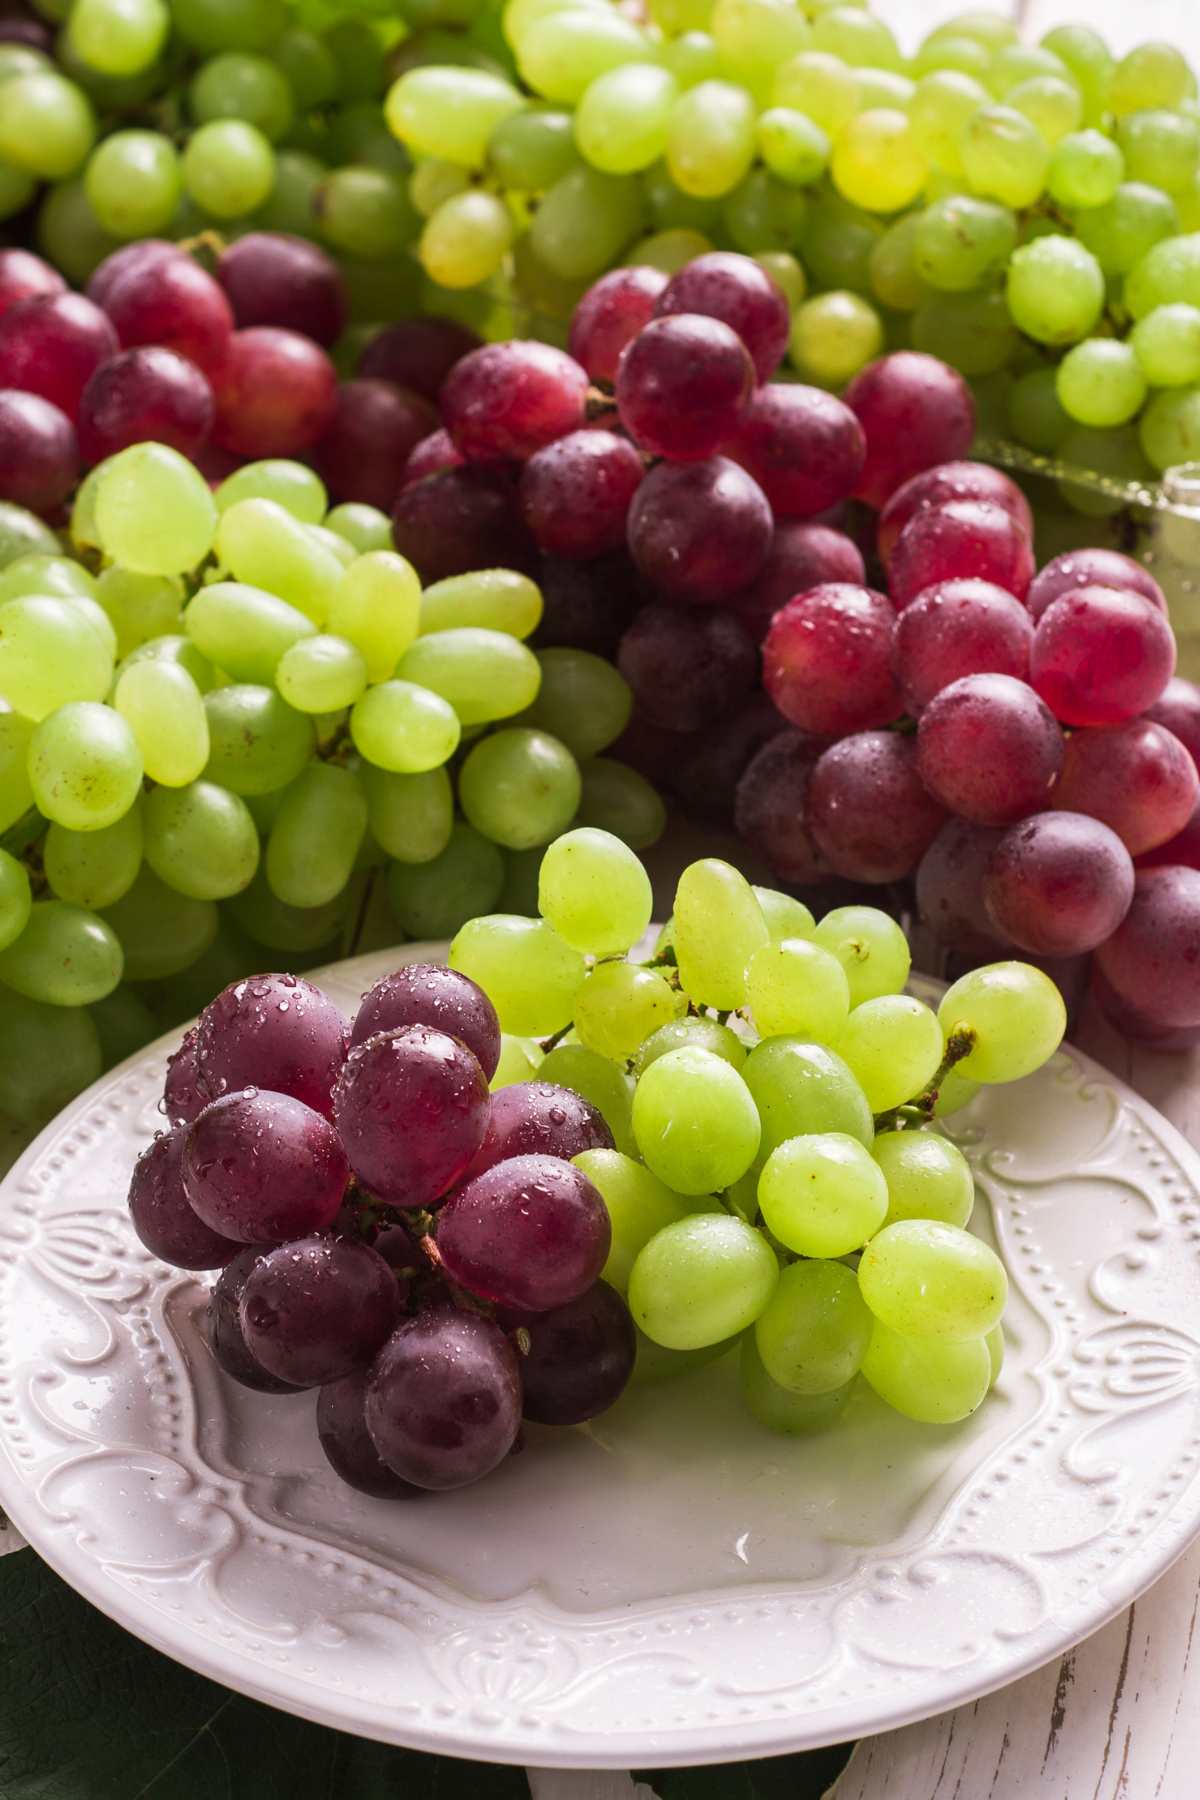 Are grapes low in carbs? Are you allowed to eat them on keto? Once you get the keto diet rules down pat, it’s easy to eat well and maintain your diet. If you’re new to it, you may still be wondering which foods can and can’t be consumed on a keto diet.